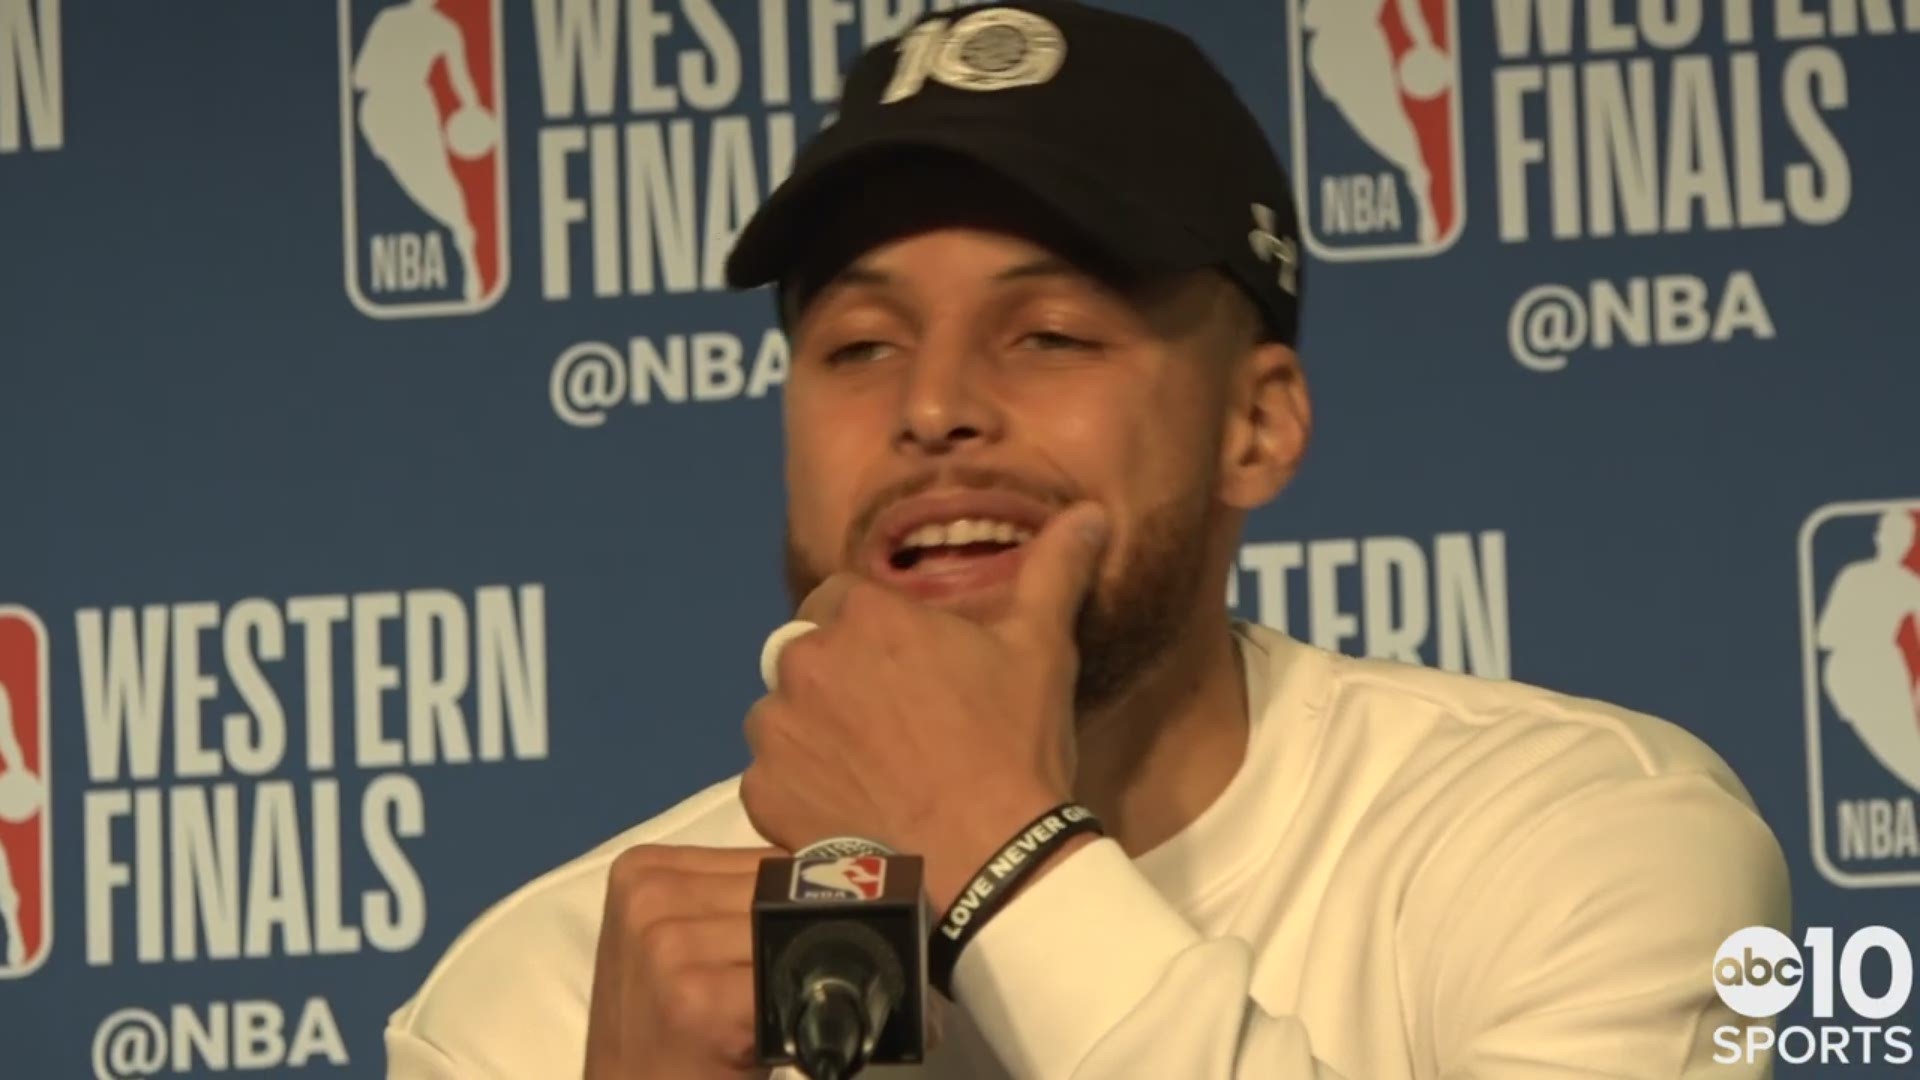 Warriors point guard Stephen Curry talks about Thursday's victory over the Trail Blazers in Game 2 of the Western Conference Finals to take a 2-0 series lead heading to Portland. He talks about the incredible matchup with his brother, Seth, the defensive play from Draymond Green and Andre Iguodala, and possibly not having Kevin Durant back in this series.